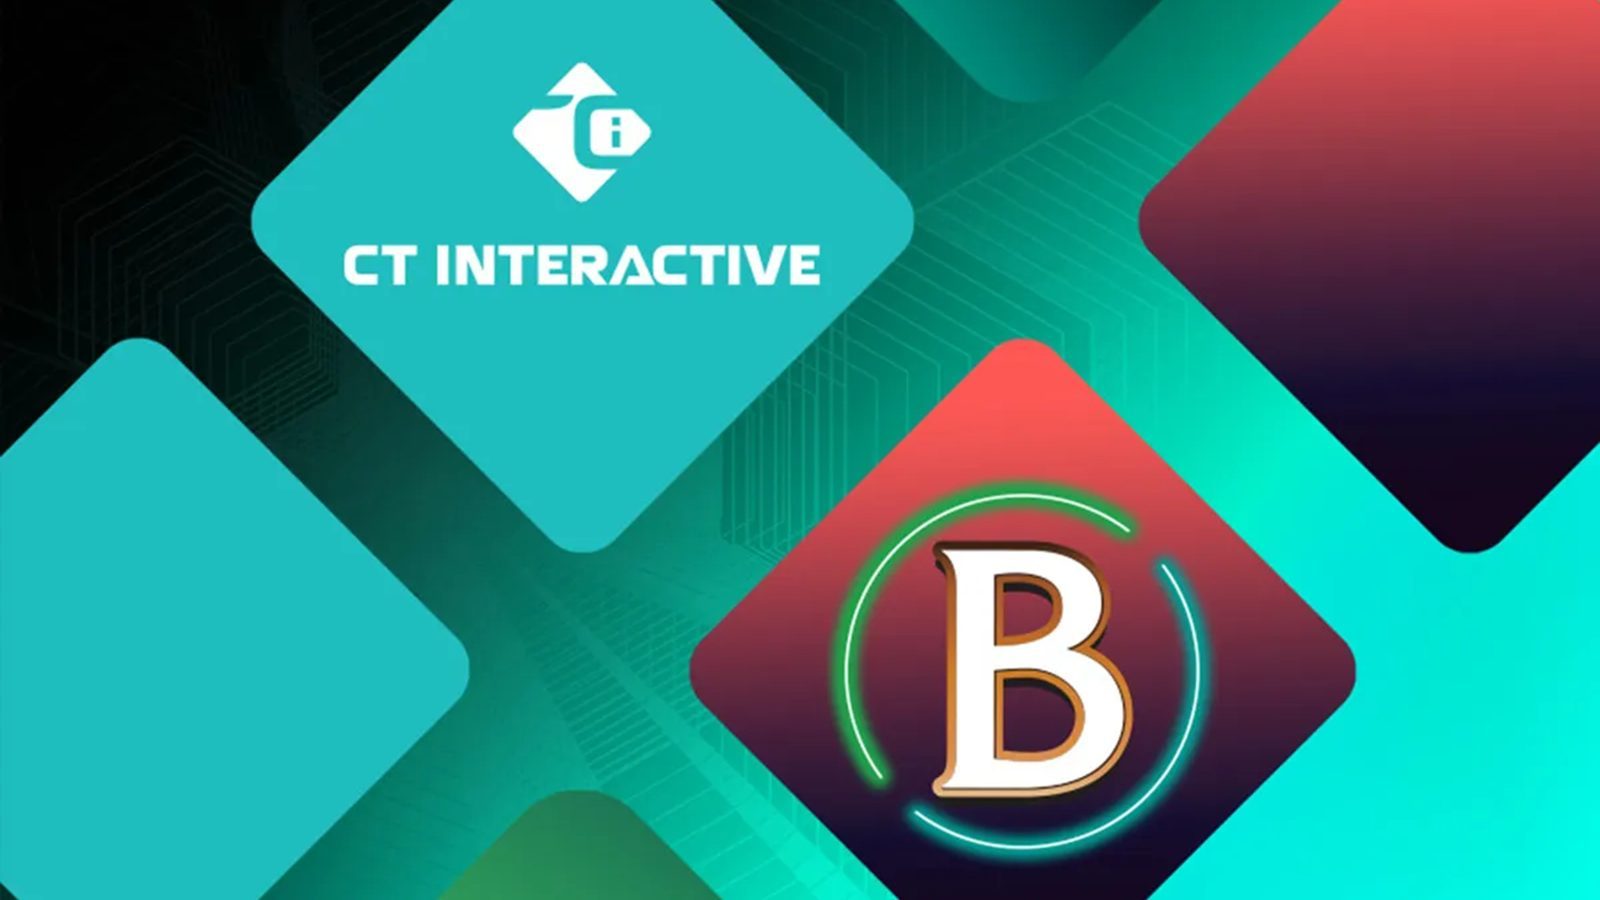 CT Interactive Expands Its Reach with BRAZINO 777